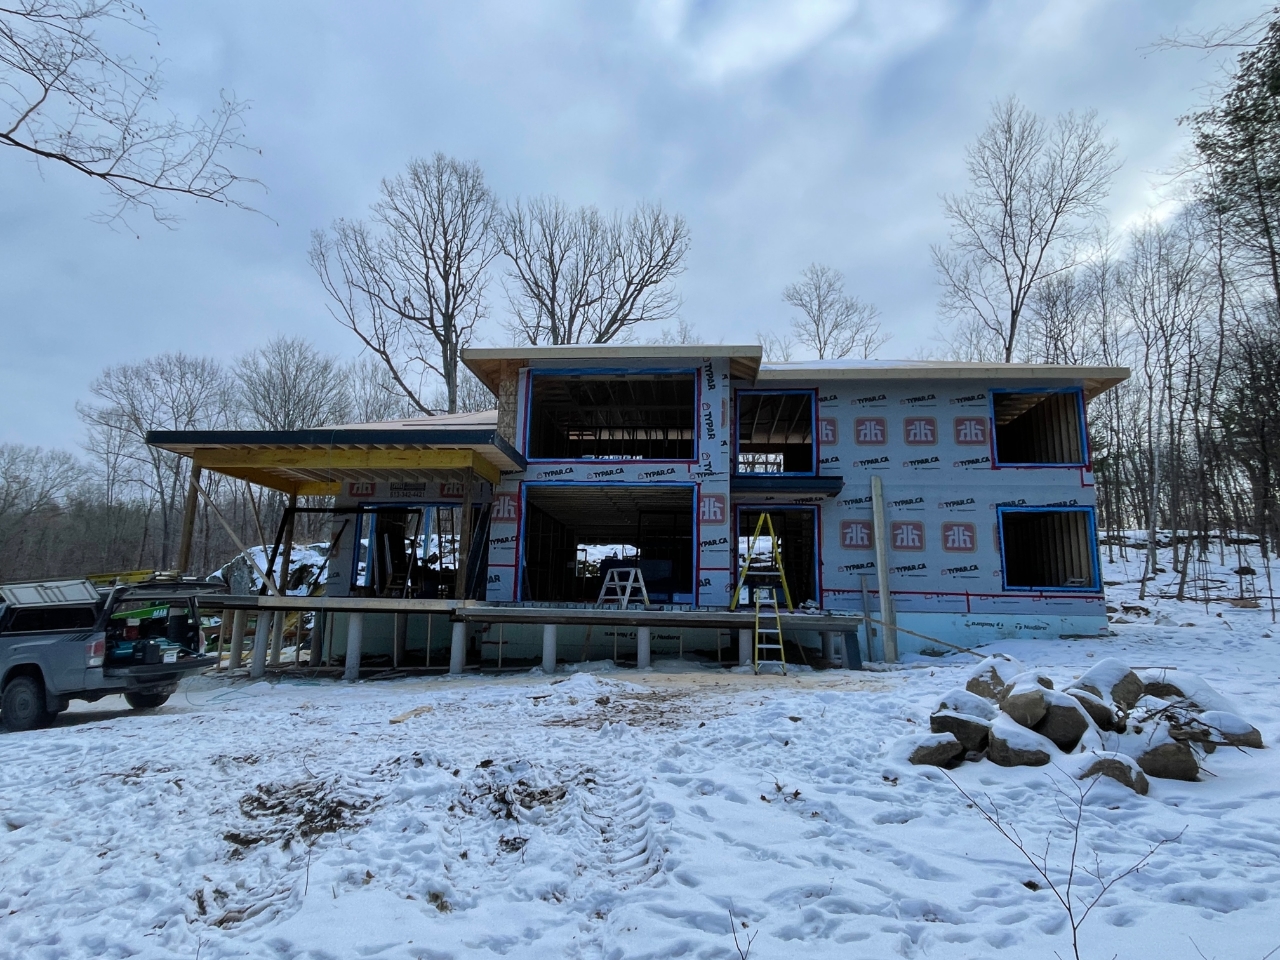 House under construction in winter.